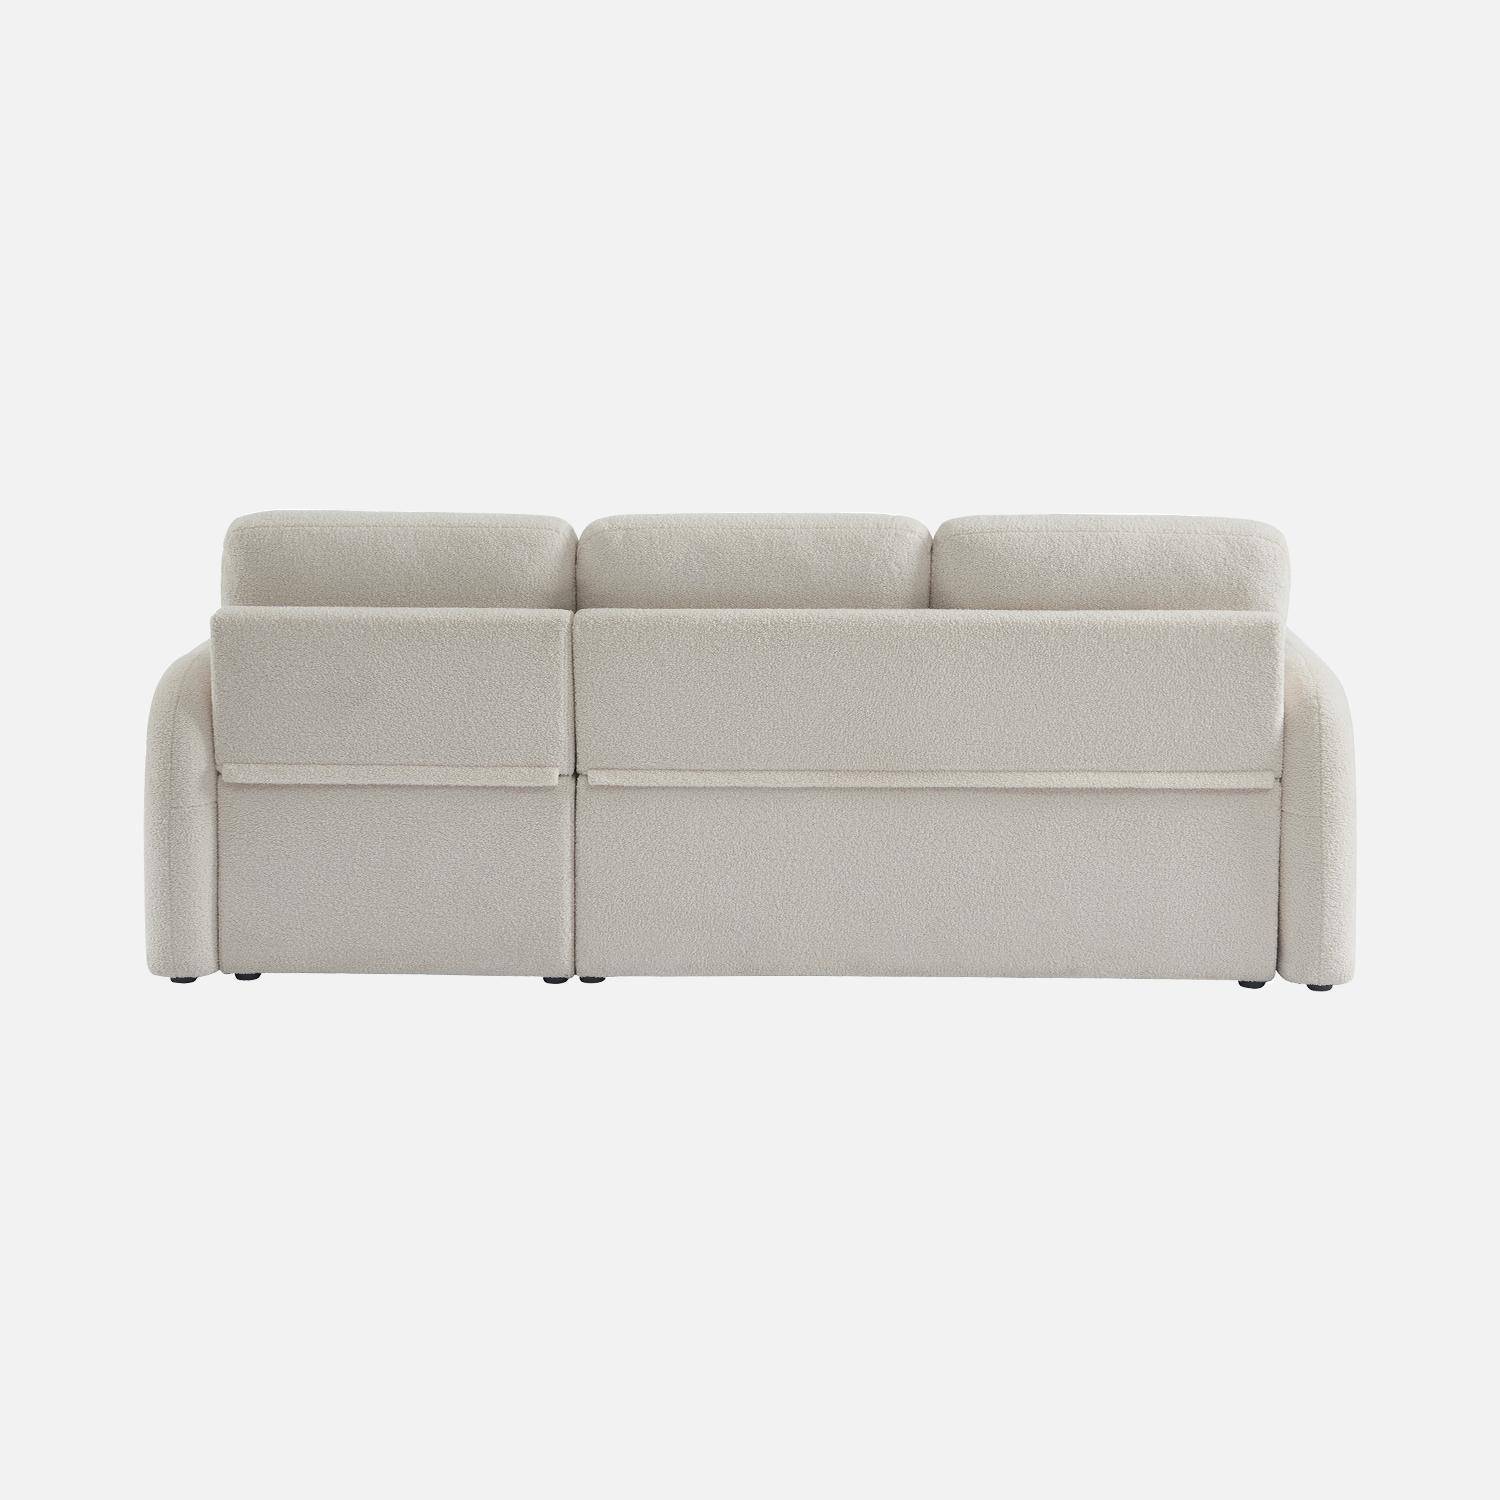 3-seater reversible corner sofa bed with storage box - Milano, Ecru, boucle fabric, rounded lines,sweeek,Photo8